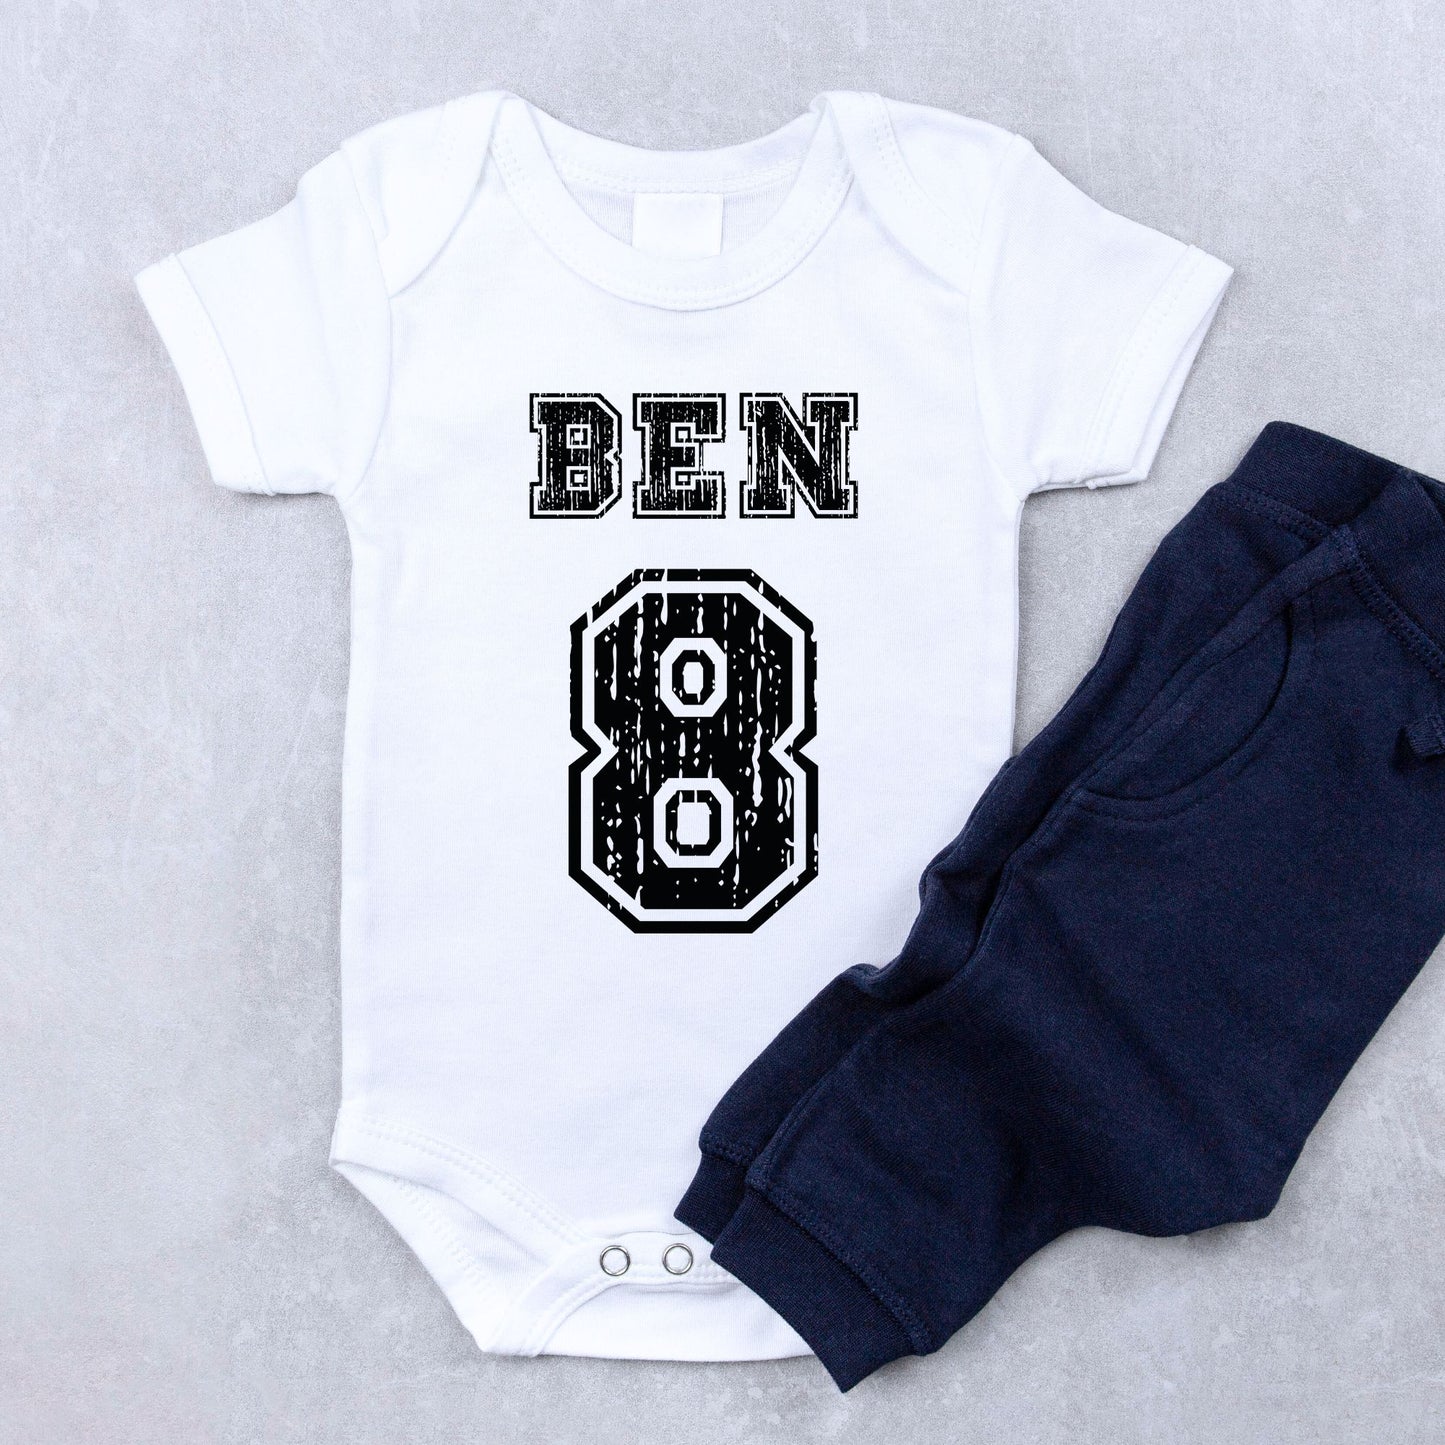 Personalized "Team Jersey" Sports Baby Romper